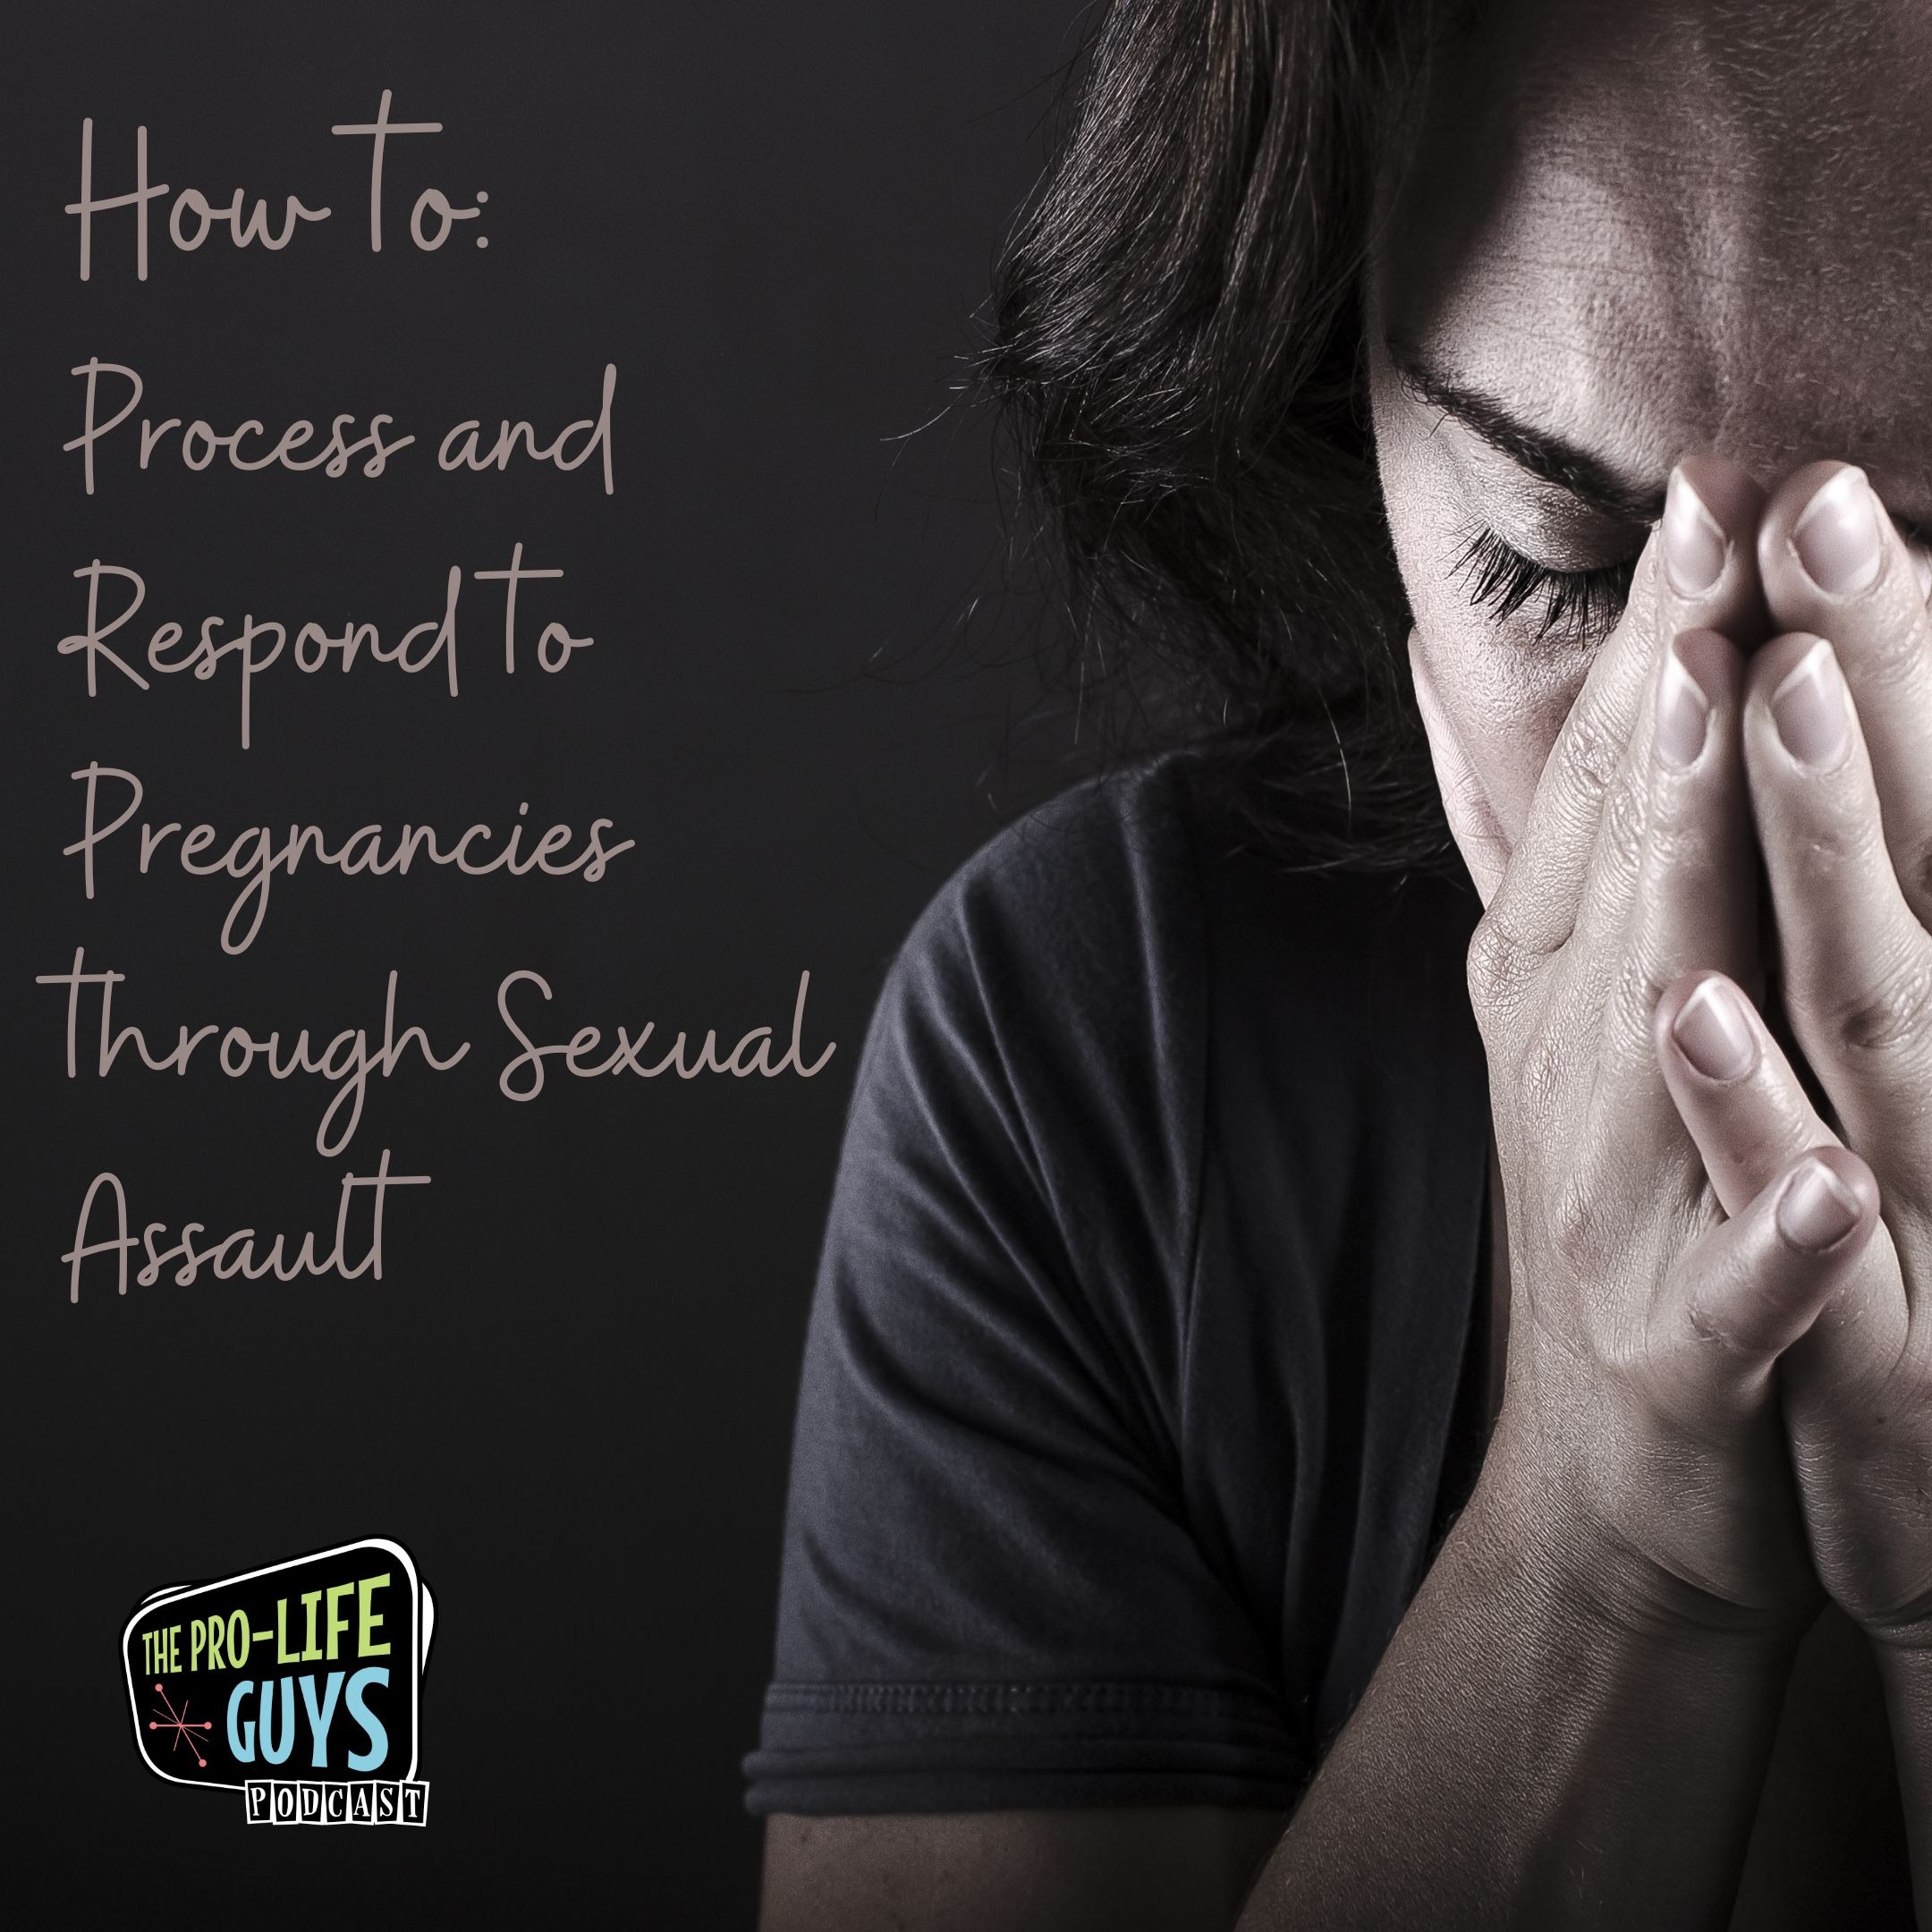 173: How to: Process and Respond to Pregnancies Through Sexual Assault